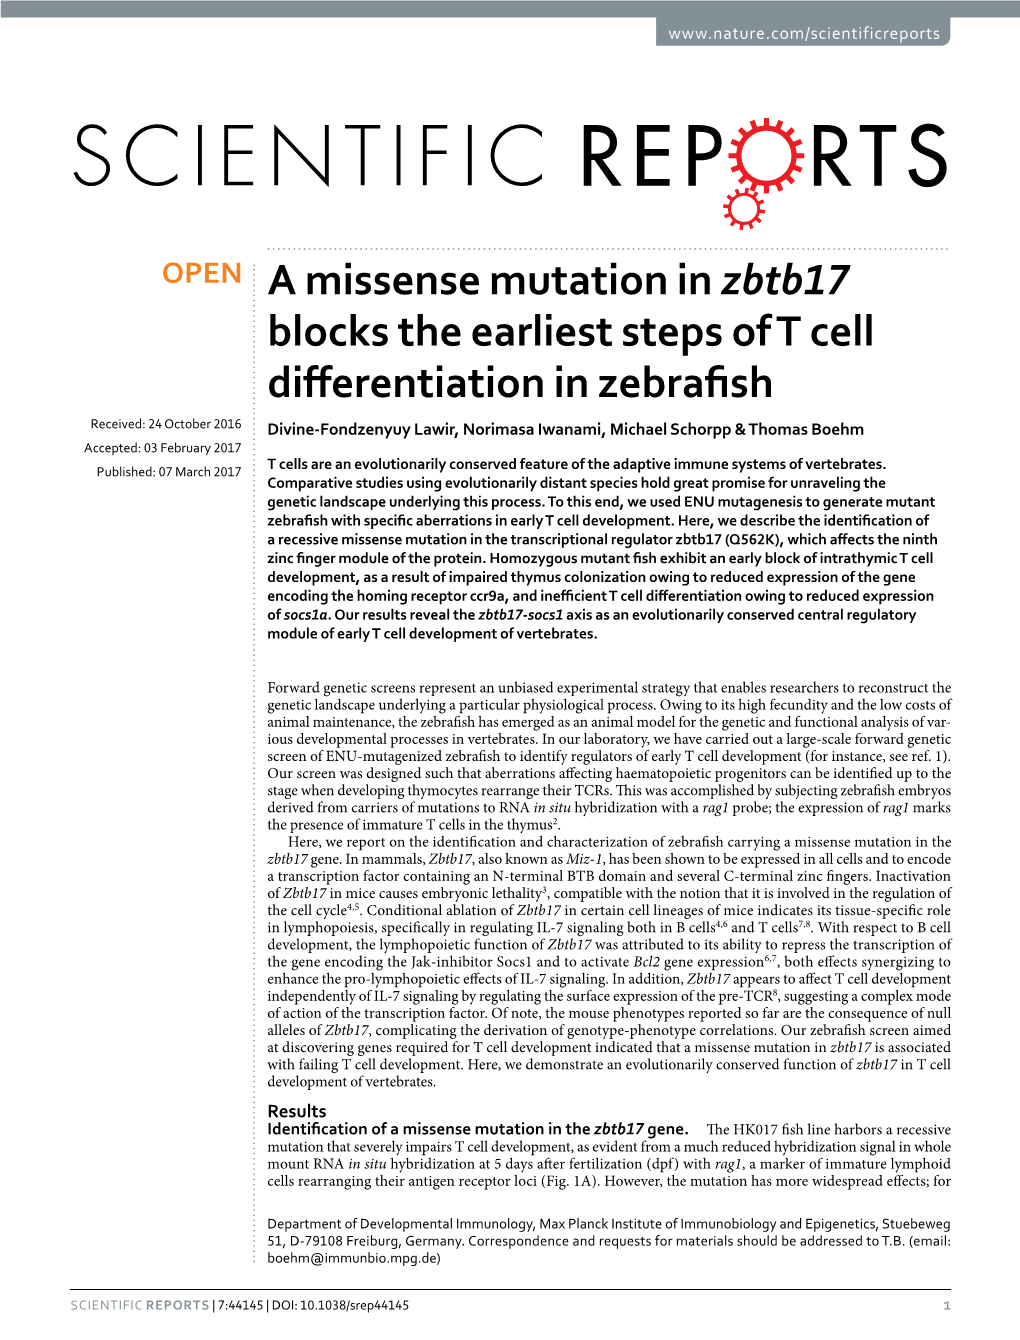 A Missense Mutation in Zbtb17 Blocks the Earliest Steps of T Cell